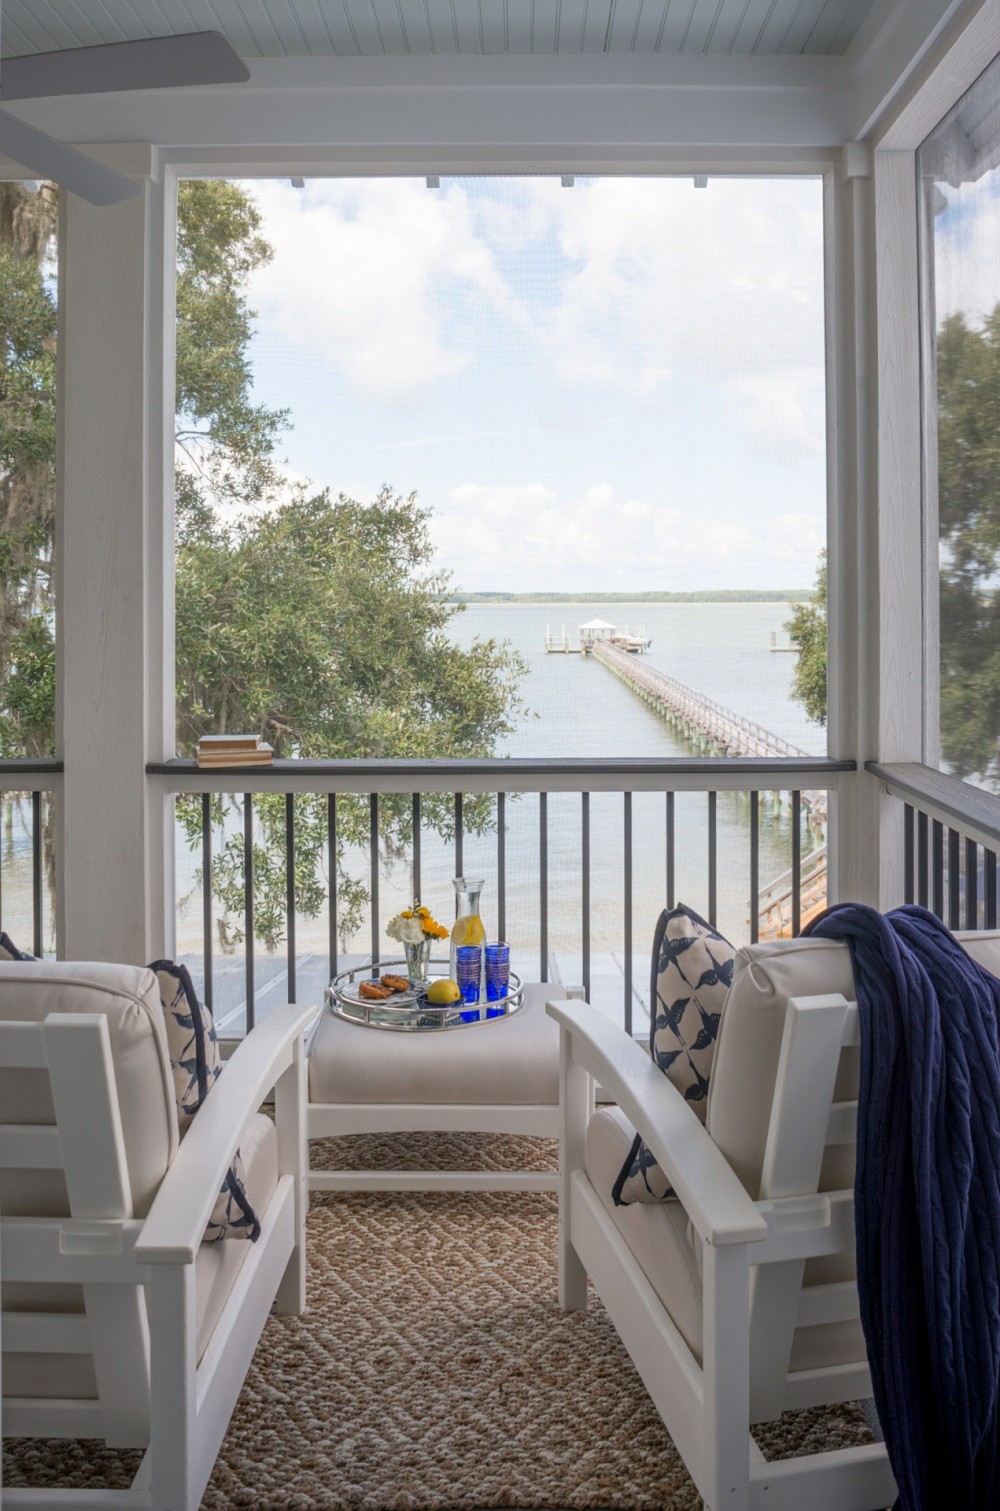   The back screen porch is a prime spot for an   apres  -sun snack and sip overlooking Port Royal Sound.  